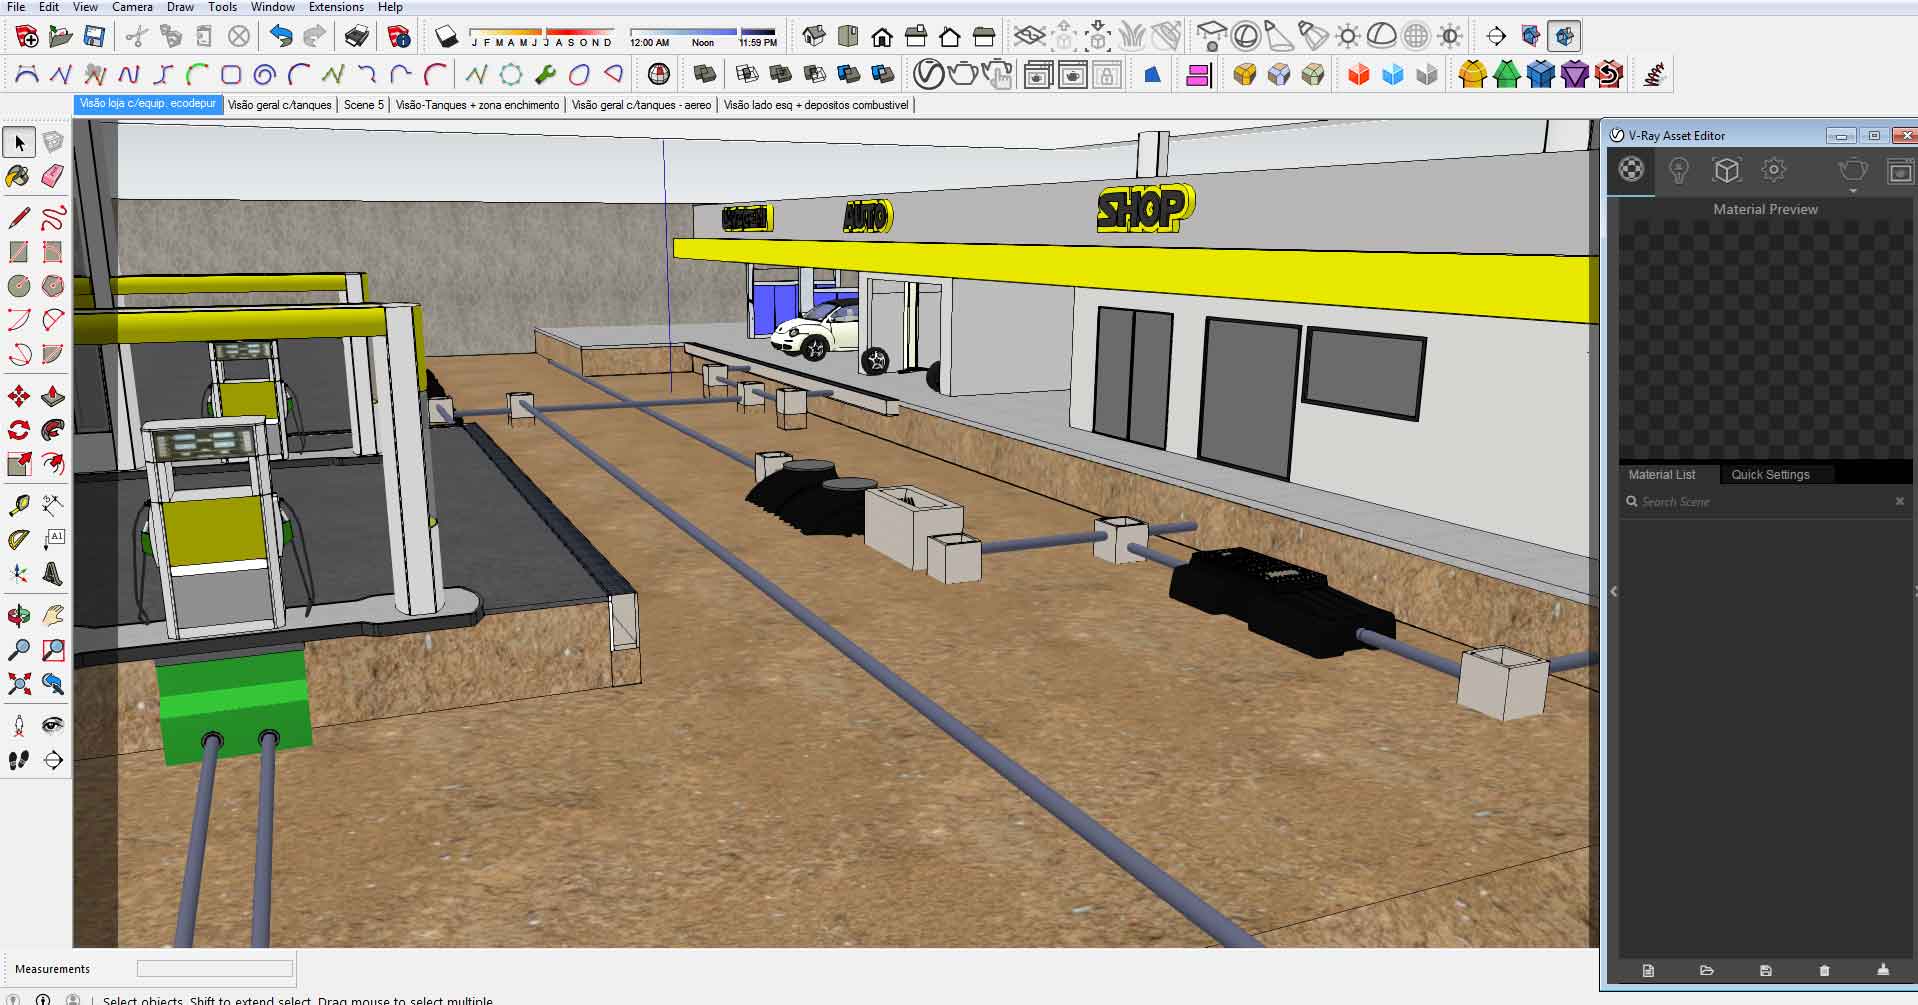 vray for sketchup 2016 free download with crack 64 bit